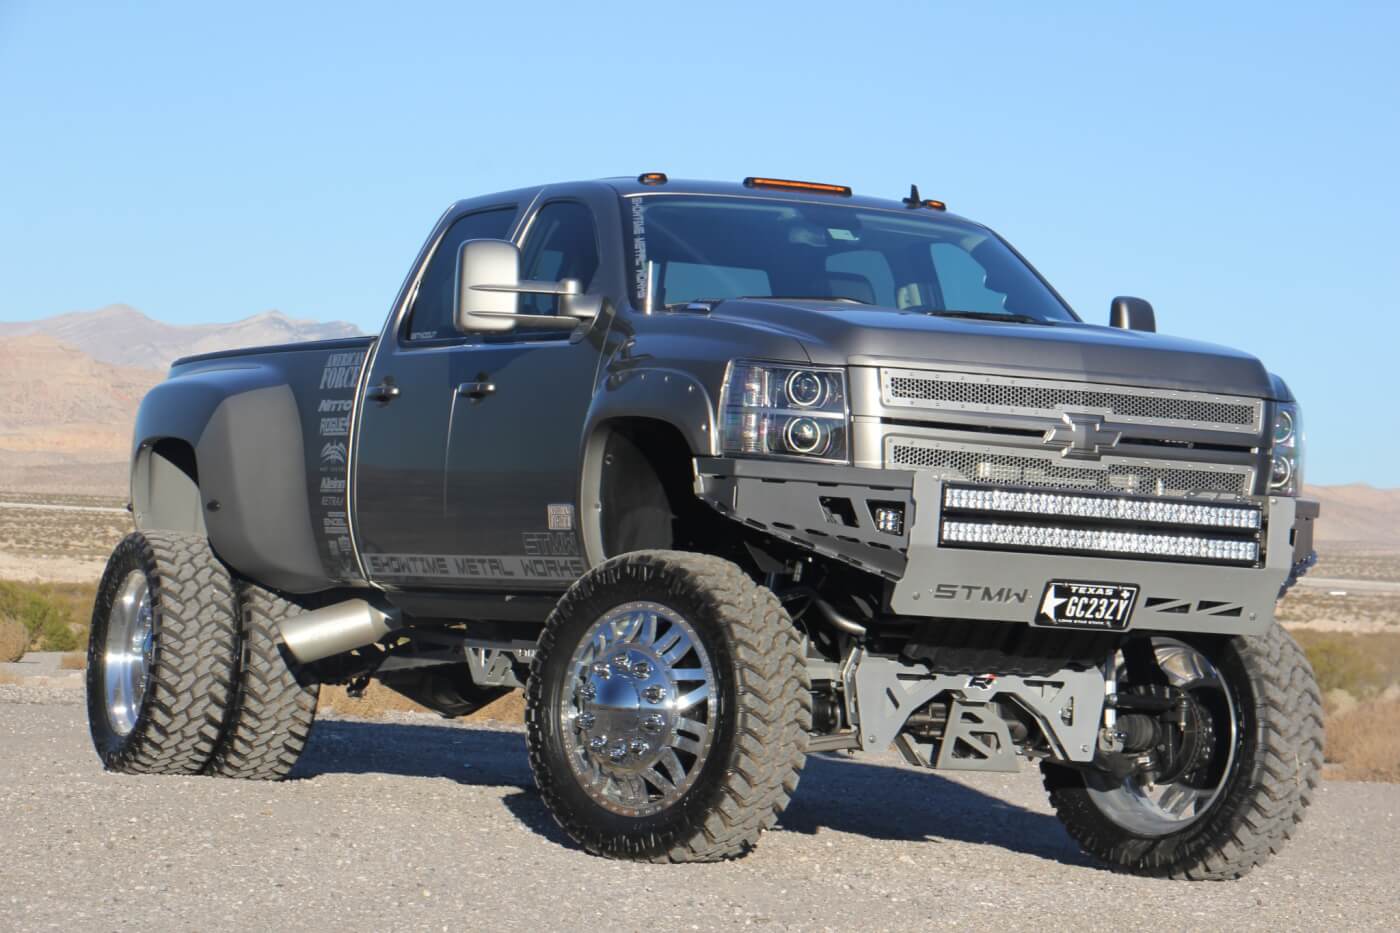 This wild Duramax Dually truck shows well and drives even better. The 10-inch lift makes no compromises and the balanced proportions make this truck stand out in any crowd. 